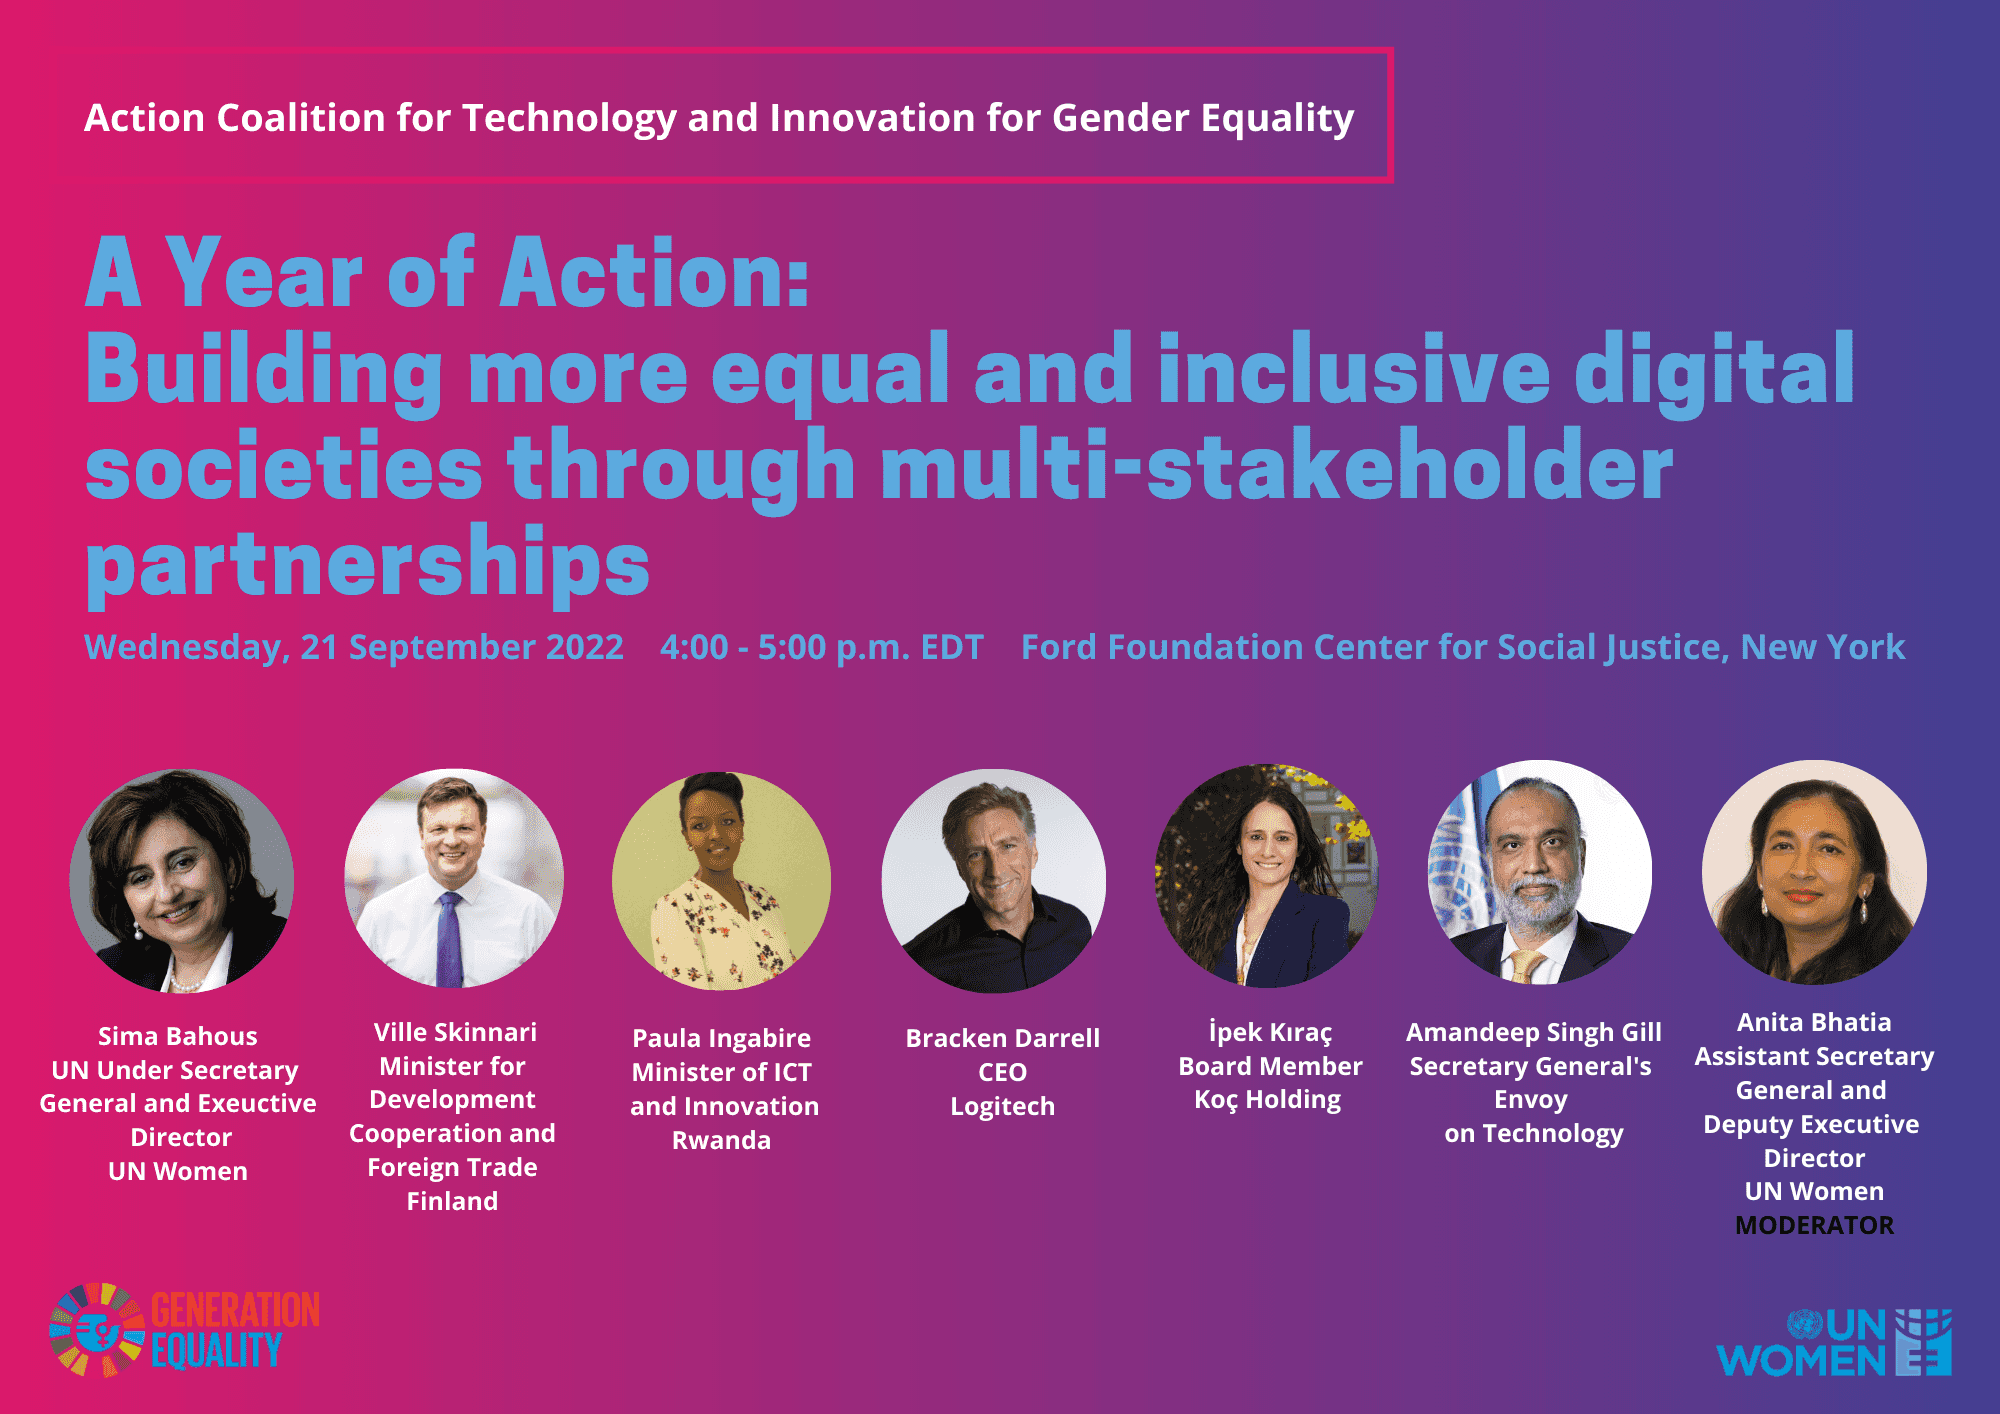 Launching a year of action to build more equal and inclusive digital societies through multi-stakeholder partnerships